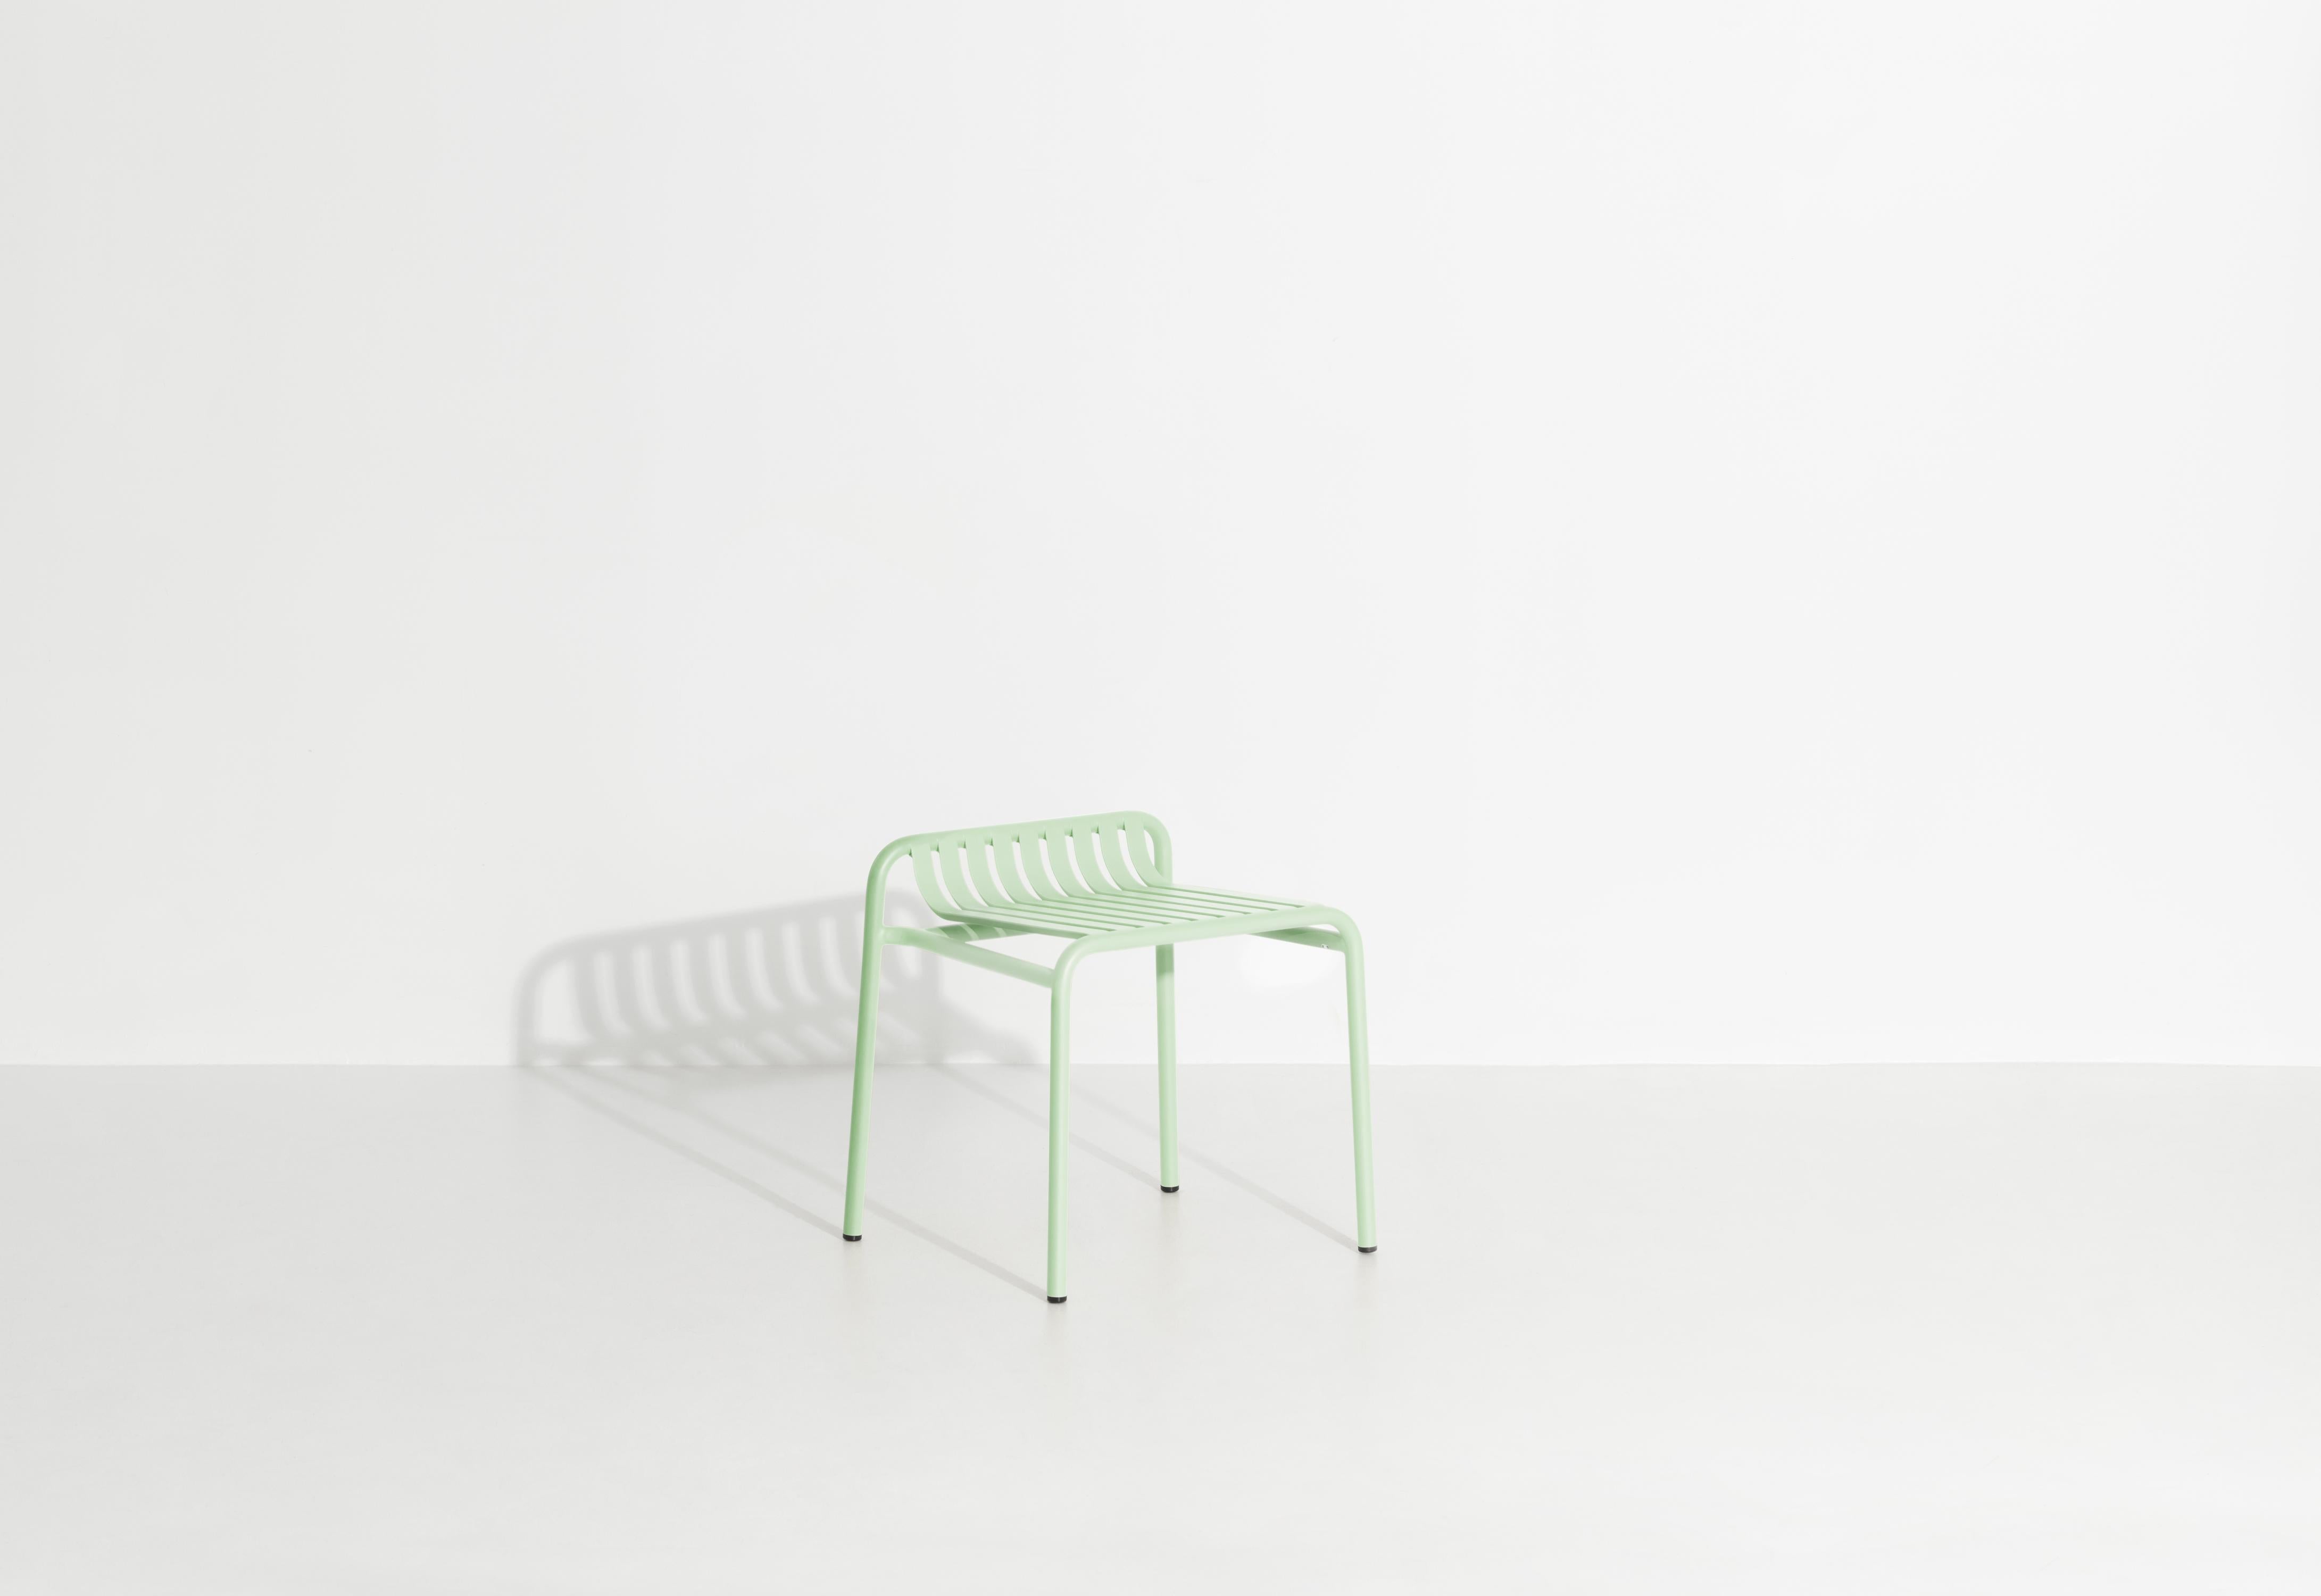 Petite Friture Week-End Stool in Pastel Green Aluminium by Studio BrichetZiegler, 2017

The week-end collection is a full range of outdoor furniture, in aluminium grained epoxy paint, matt finish, that includes 18 functions and 8 colours for the